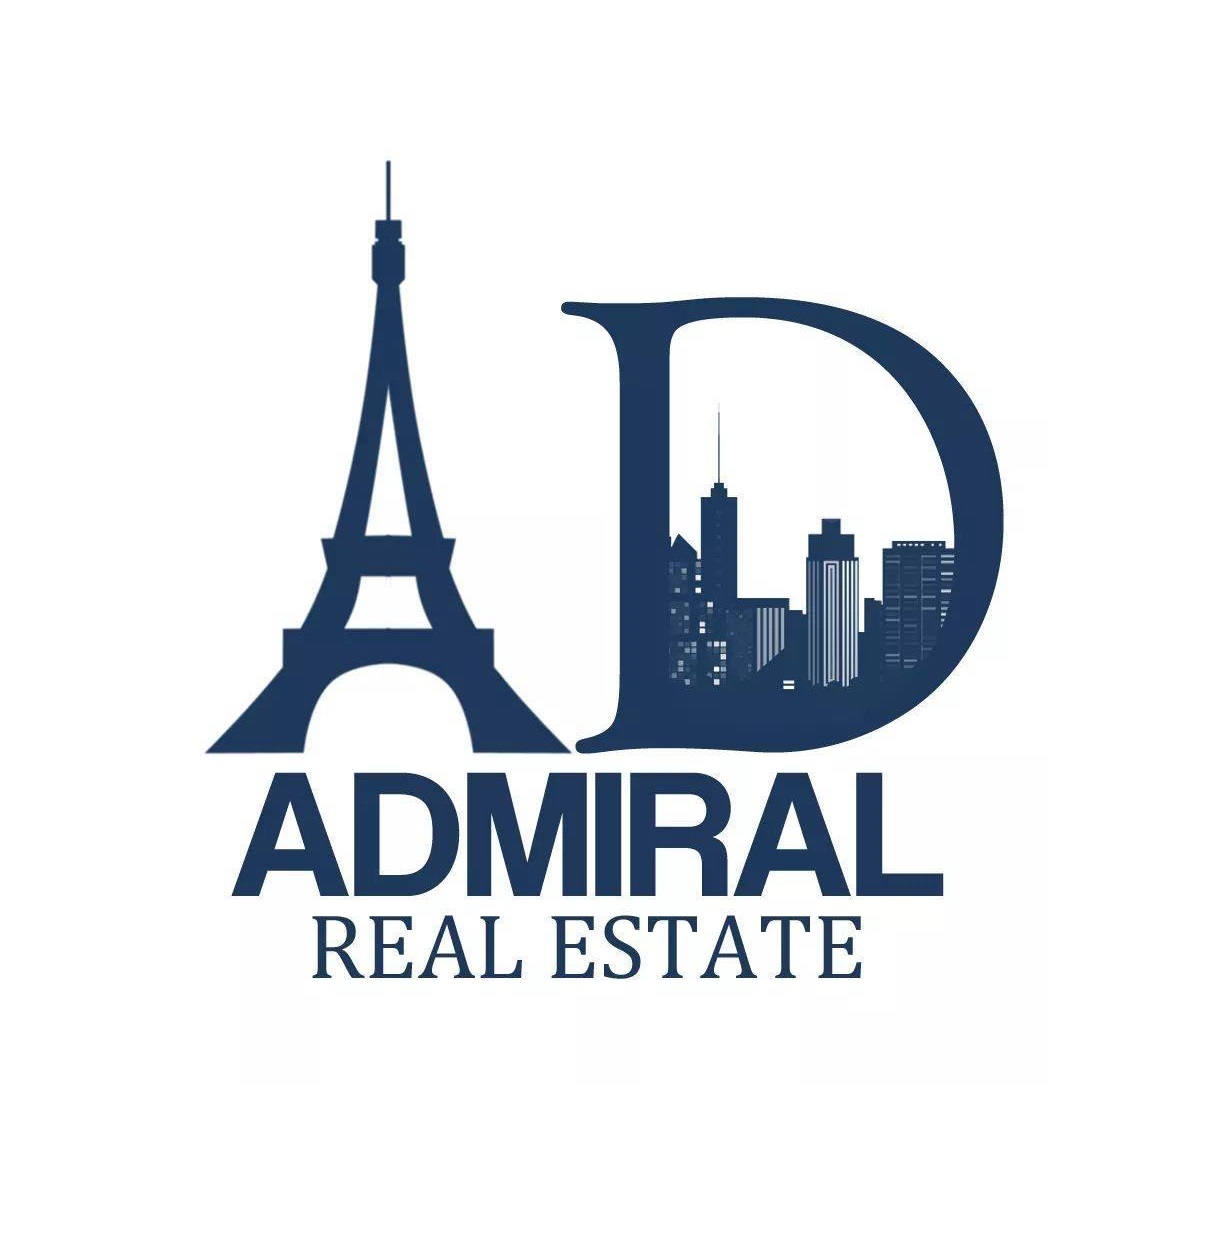 Jobs and opportunities at Admiral Real Estate company | Jobiano